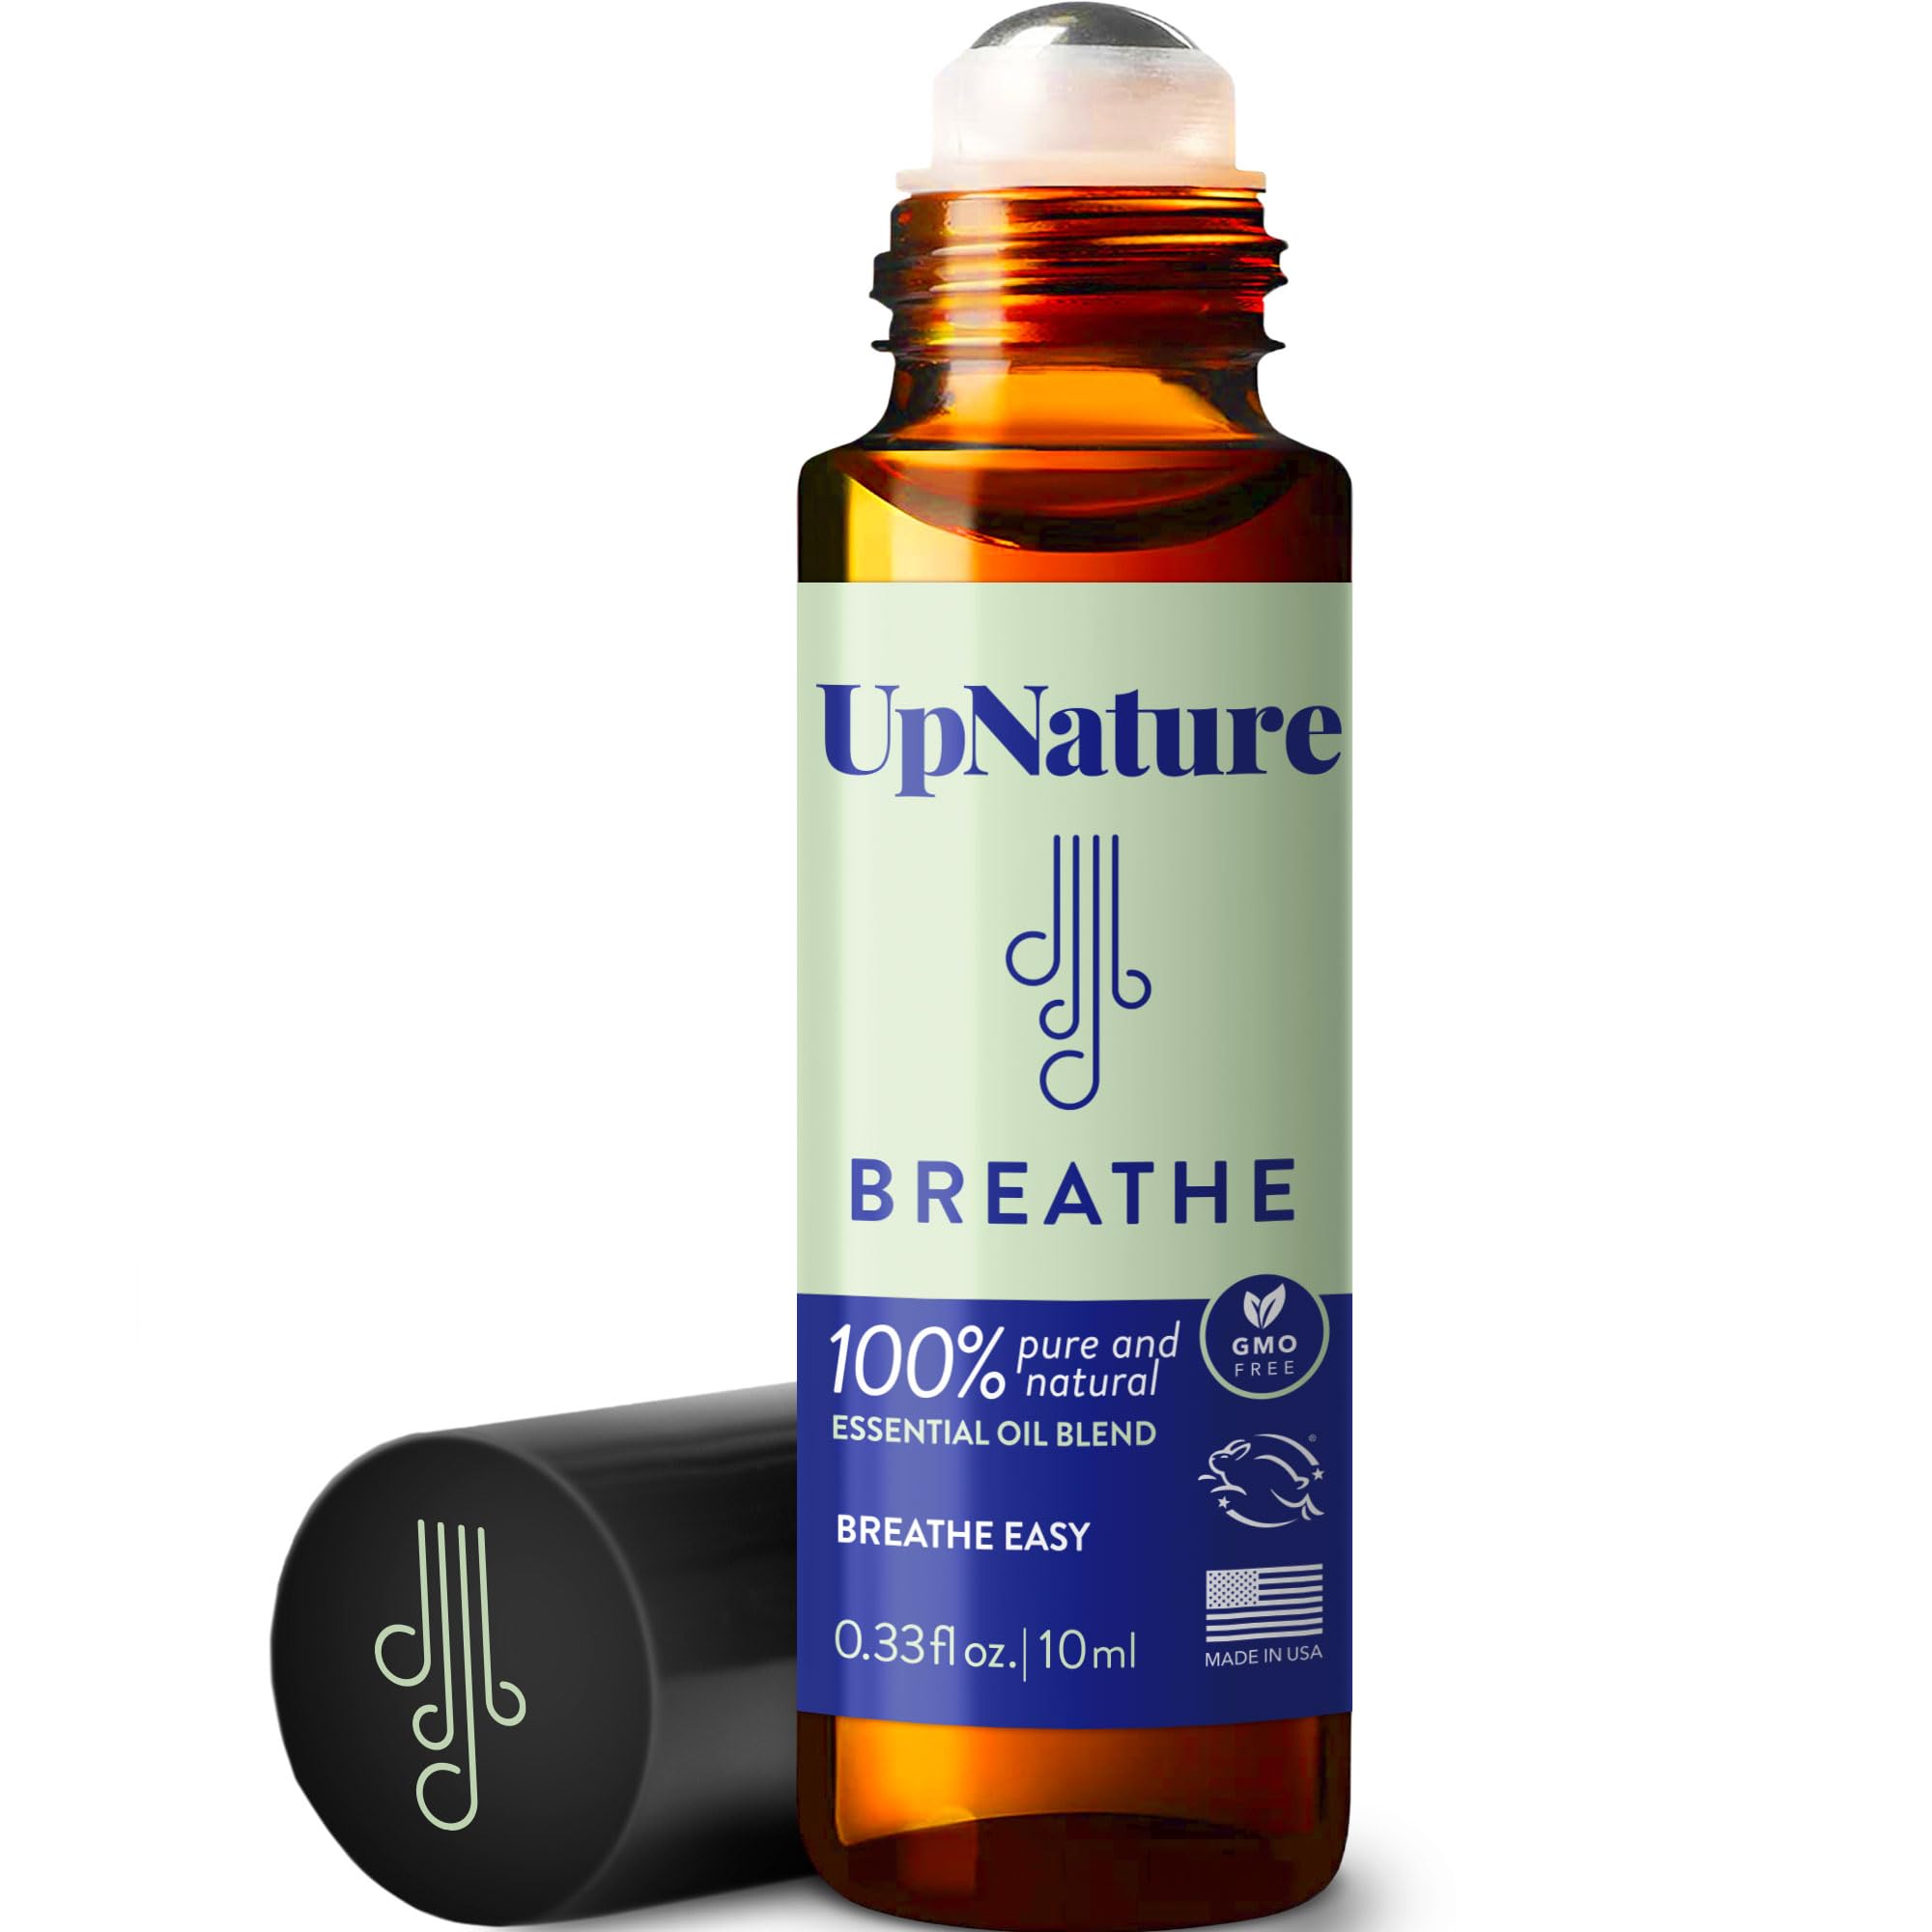 Breathe Essential Oil Roll On Blend- Allergy Relief & Sinus Relief - Breathe Easy Essential Oil with Eucalyptus Essential Oil, Peppermint, Tea Tree, Therapeutic Grade, Gifts Under 10 Dollars